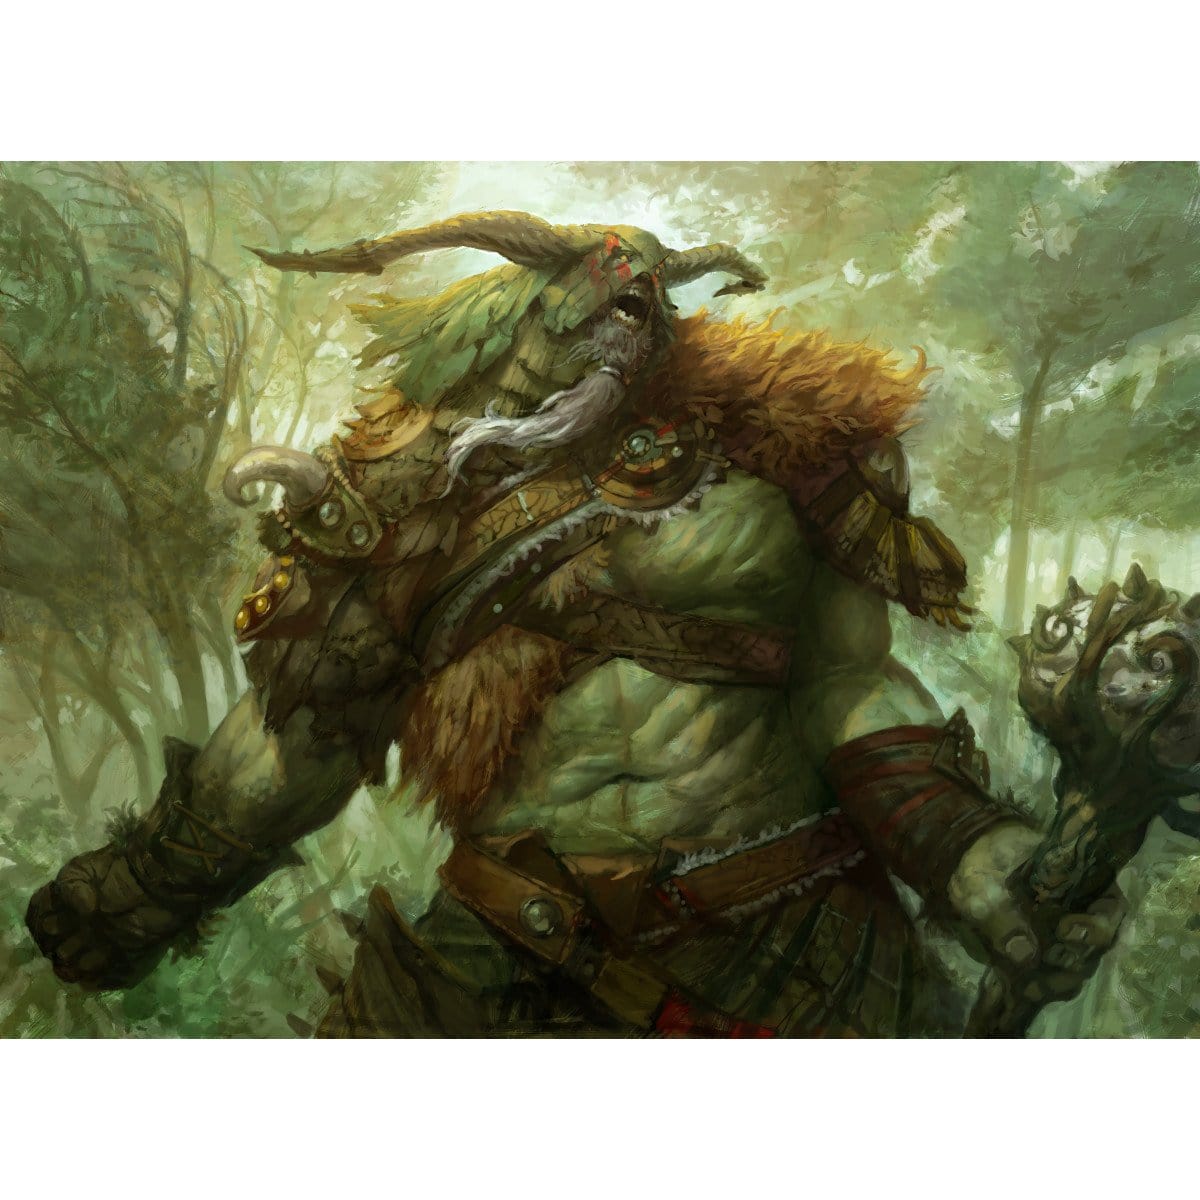 Primeval Titan Print - Print - Original Magic Art - Accessories for Magic the Gathering and other card games